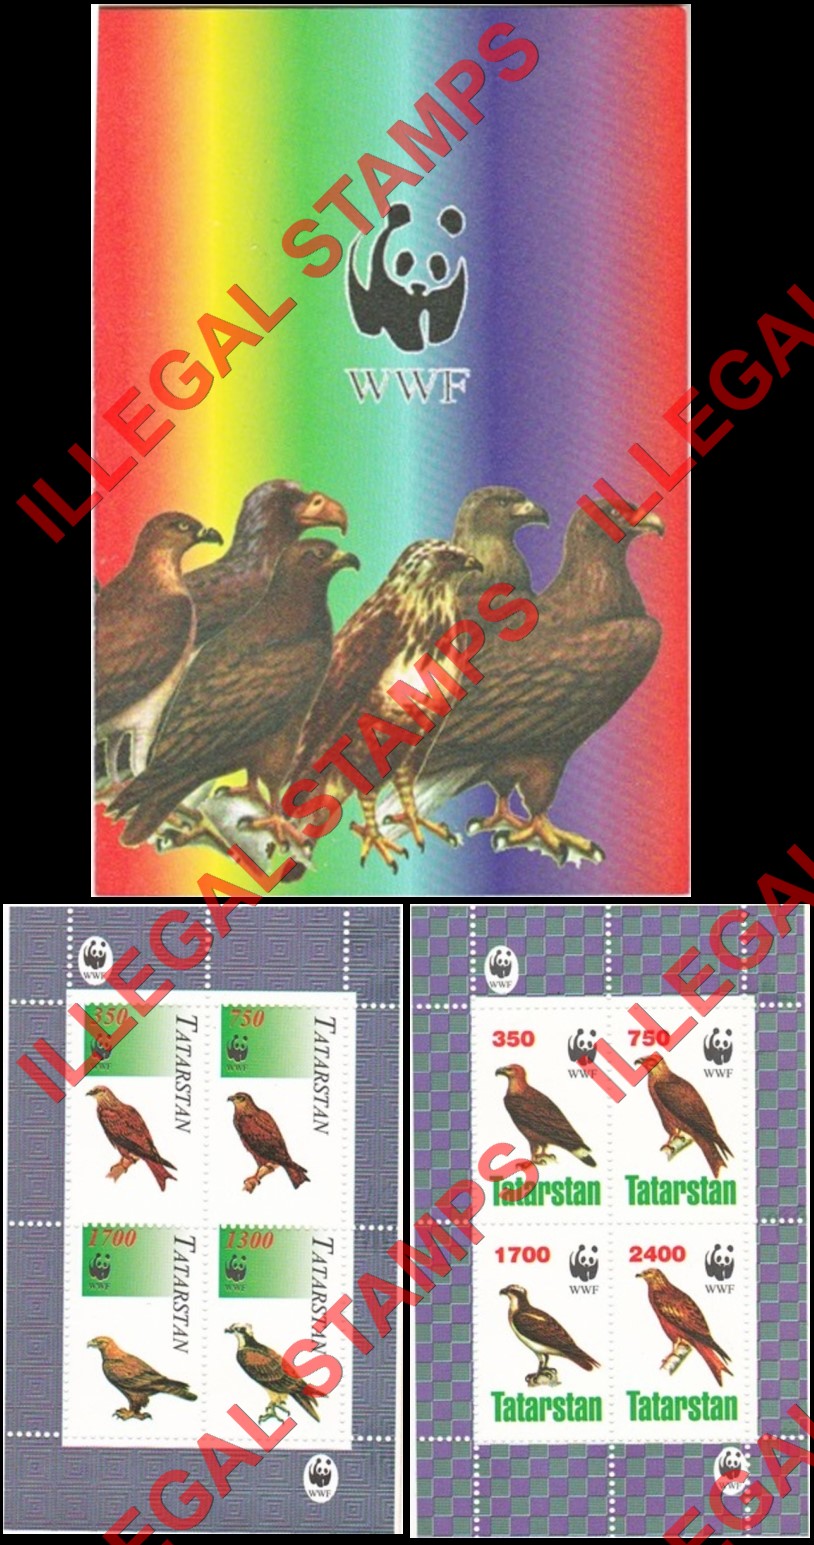 Republic of Tatarstan 1996 Counterfeit Illegal Stamp Booklets